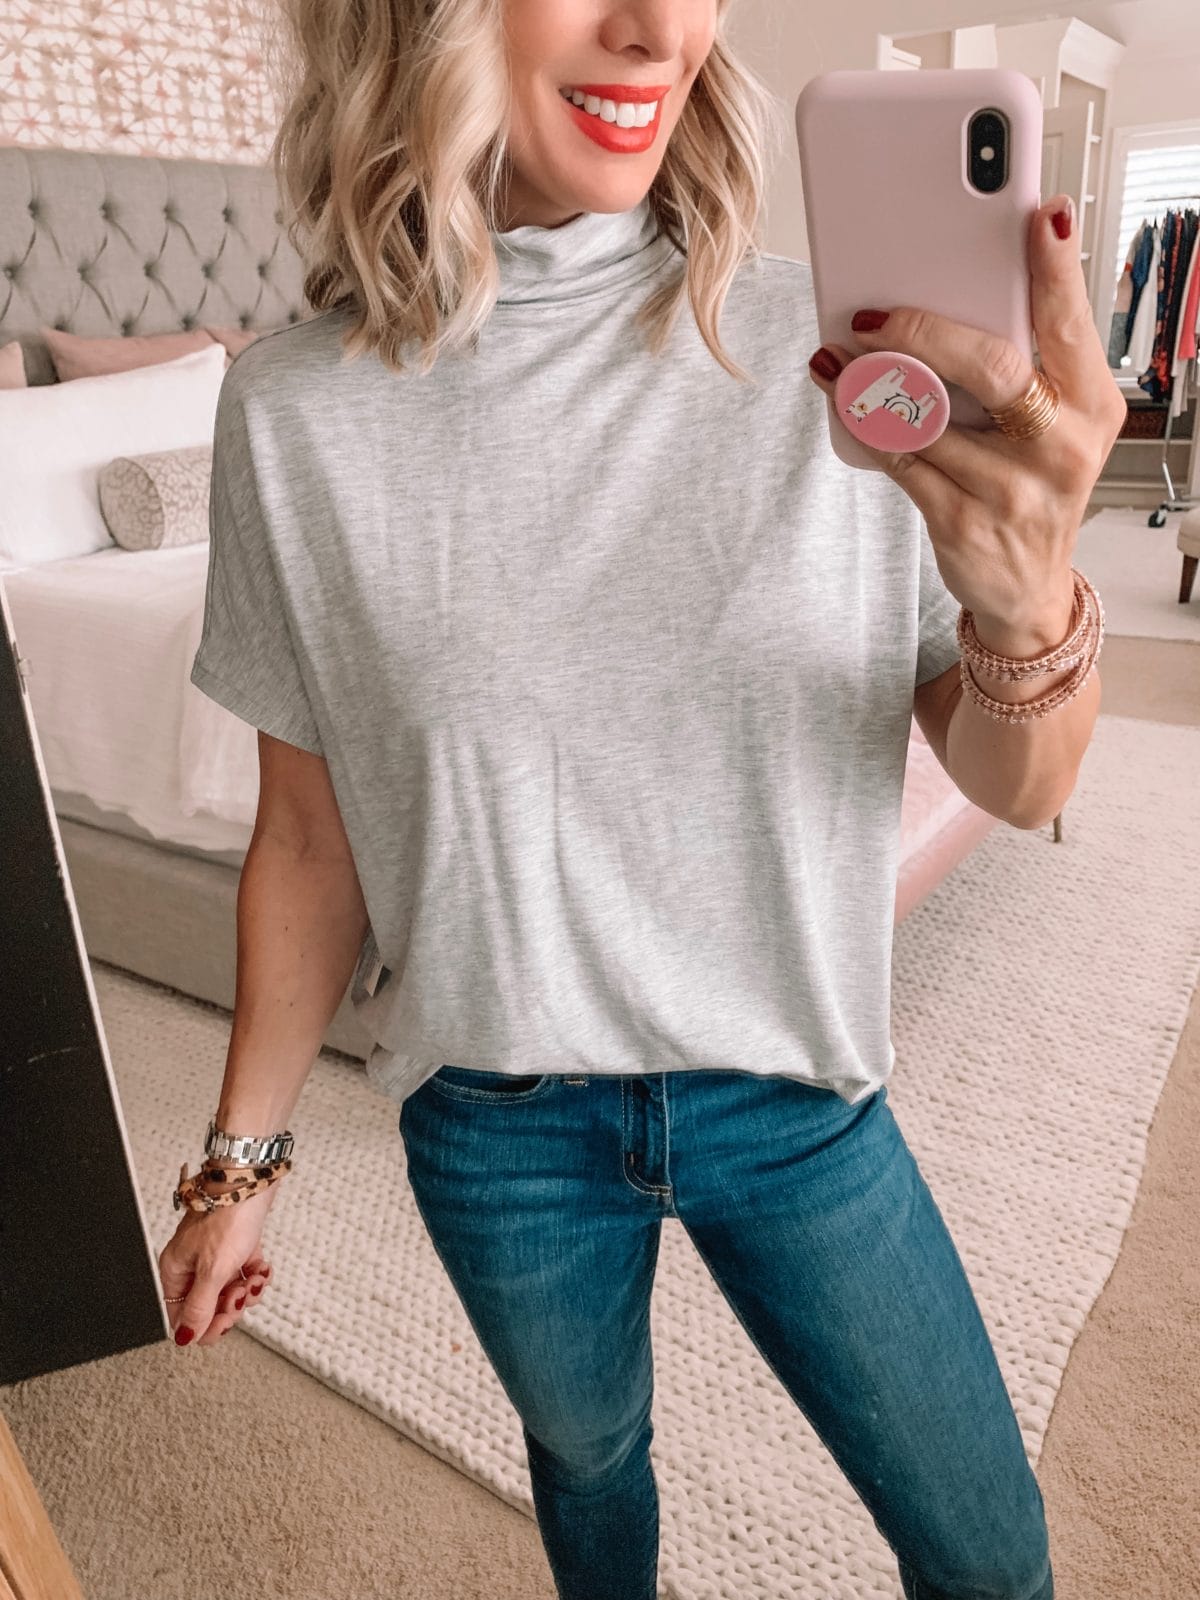 Amazon Prime Fashion- Grey Pullover and Jeans 